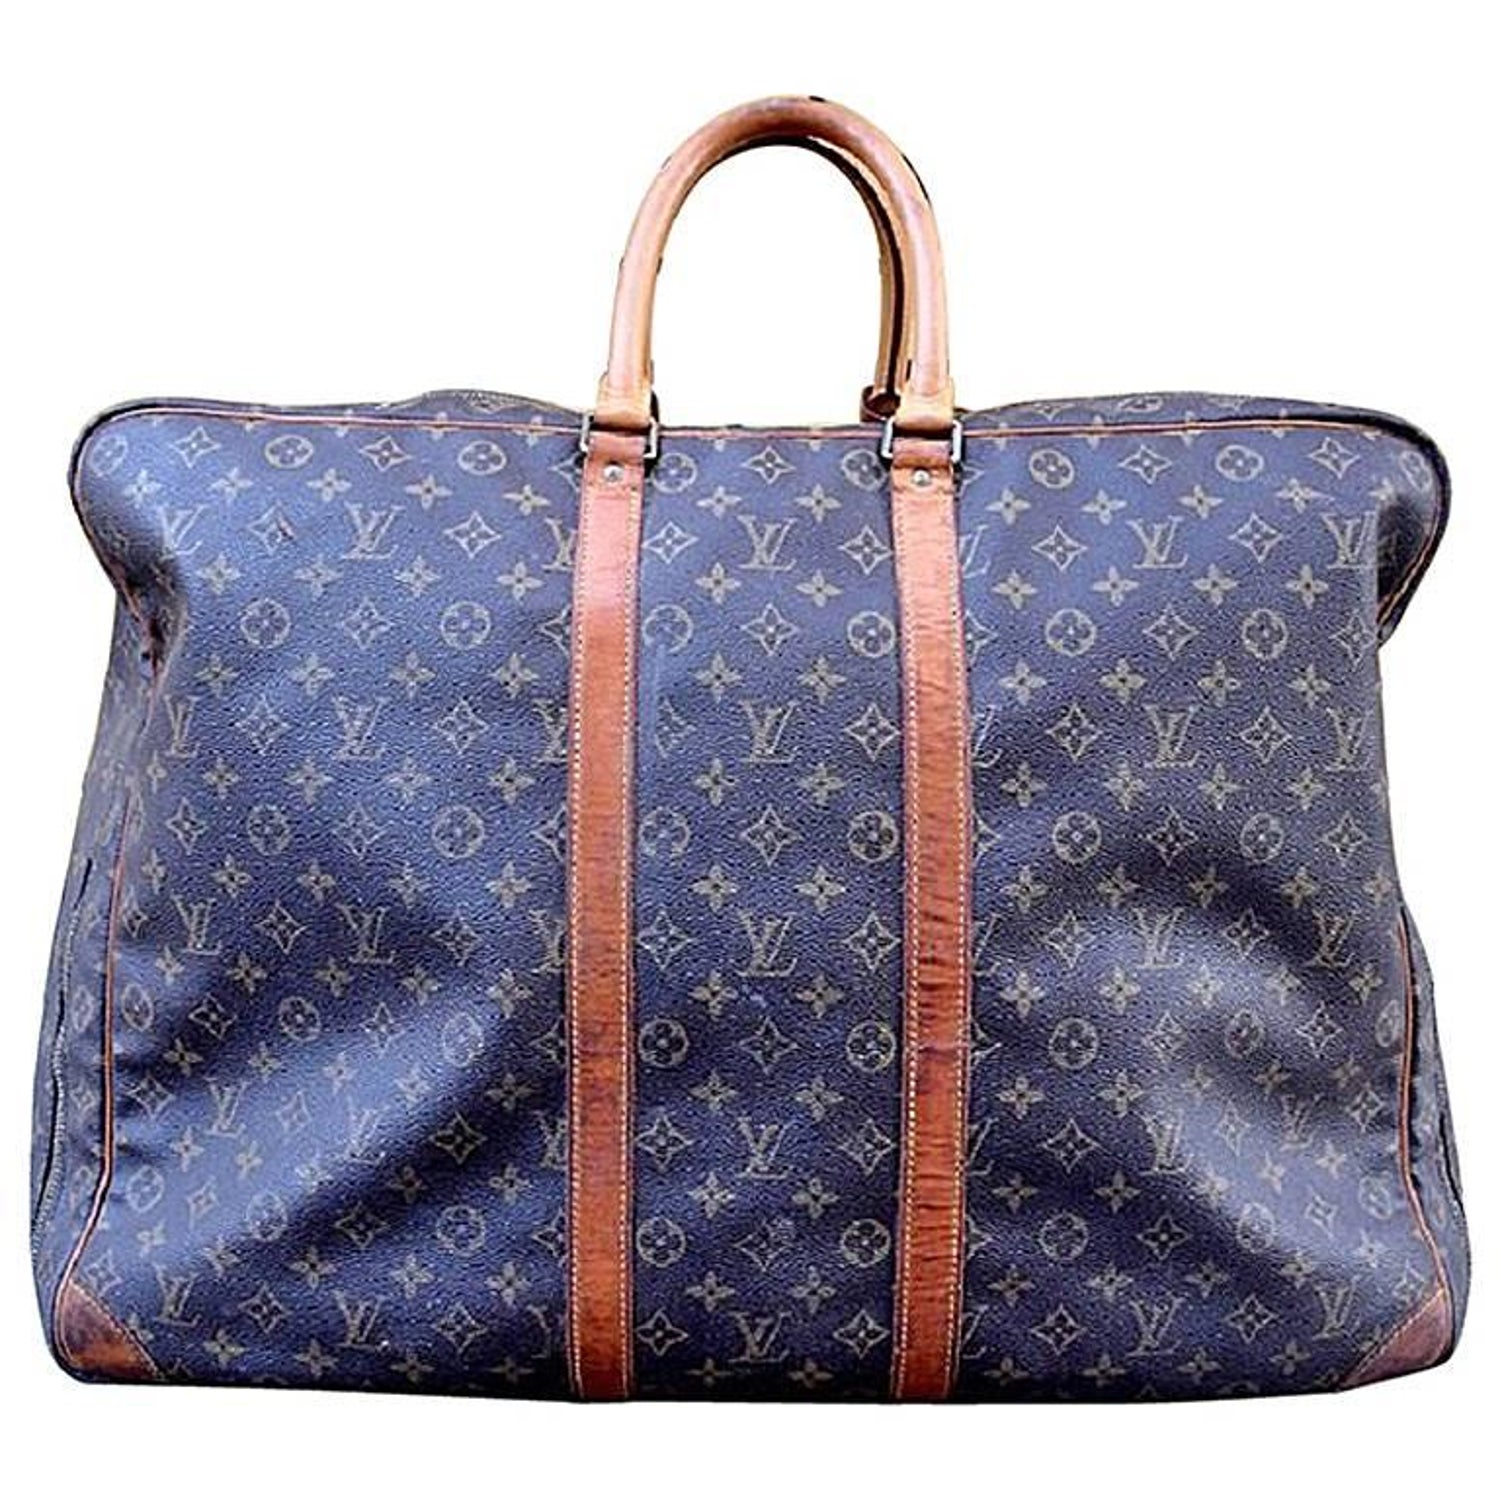 1960s Louis Vuitton Monogram Travel Bag Special Made for Saks Fifth Avenue